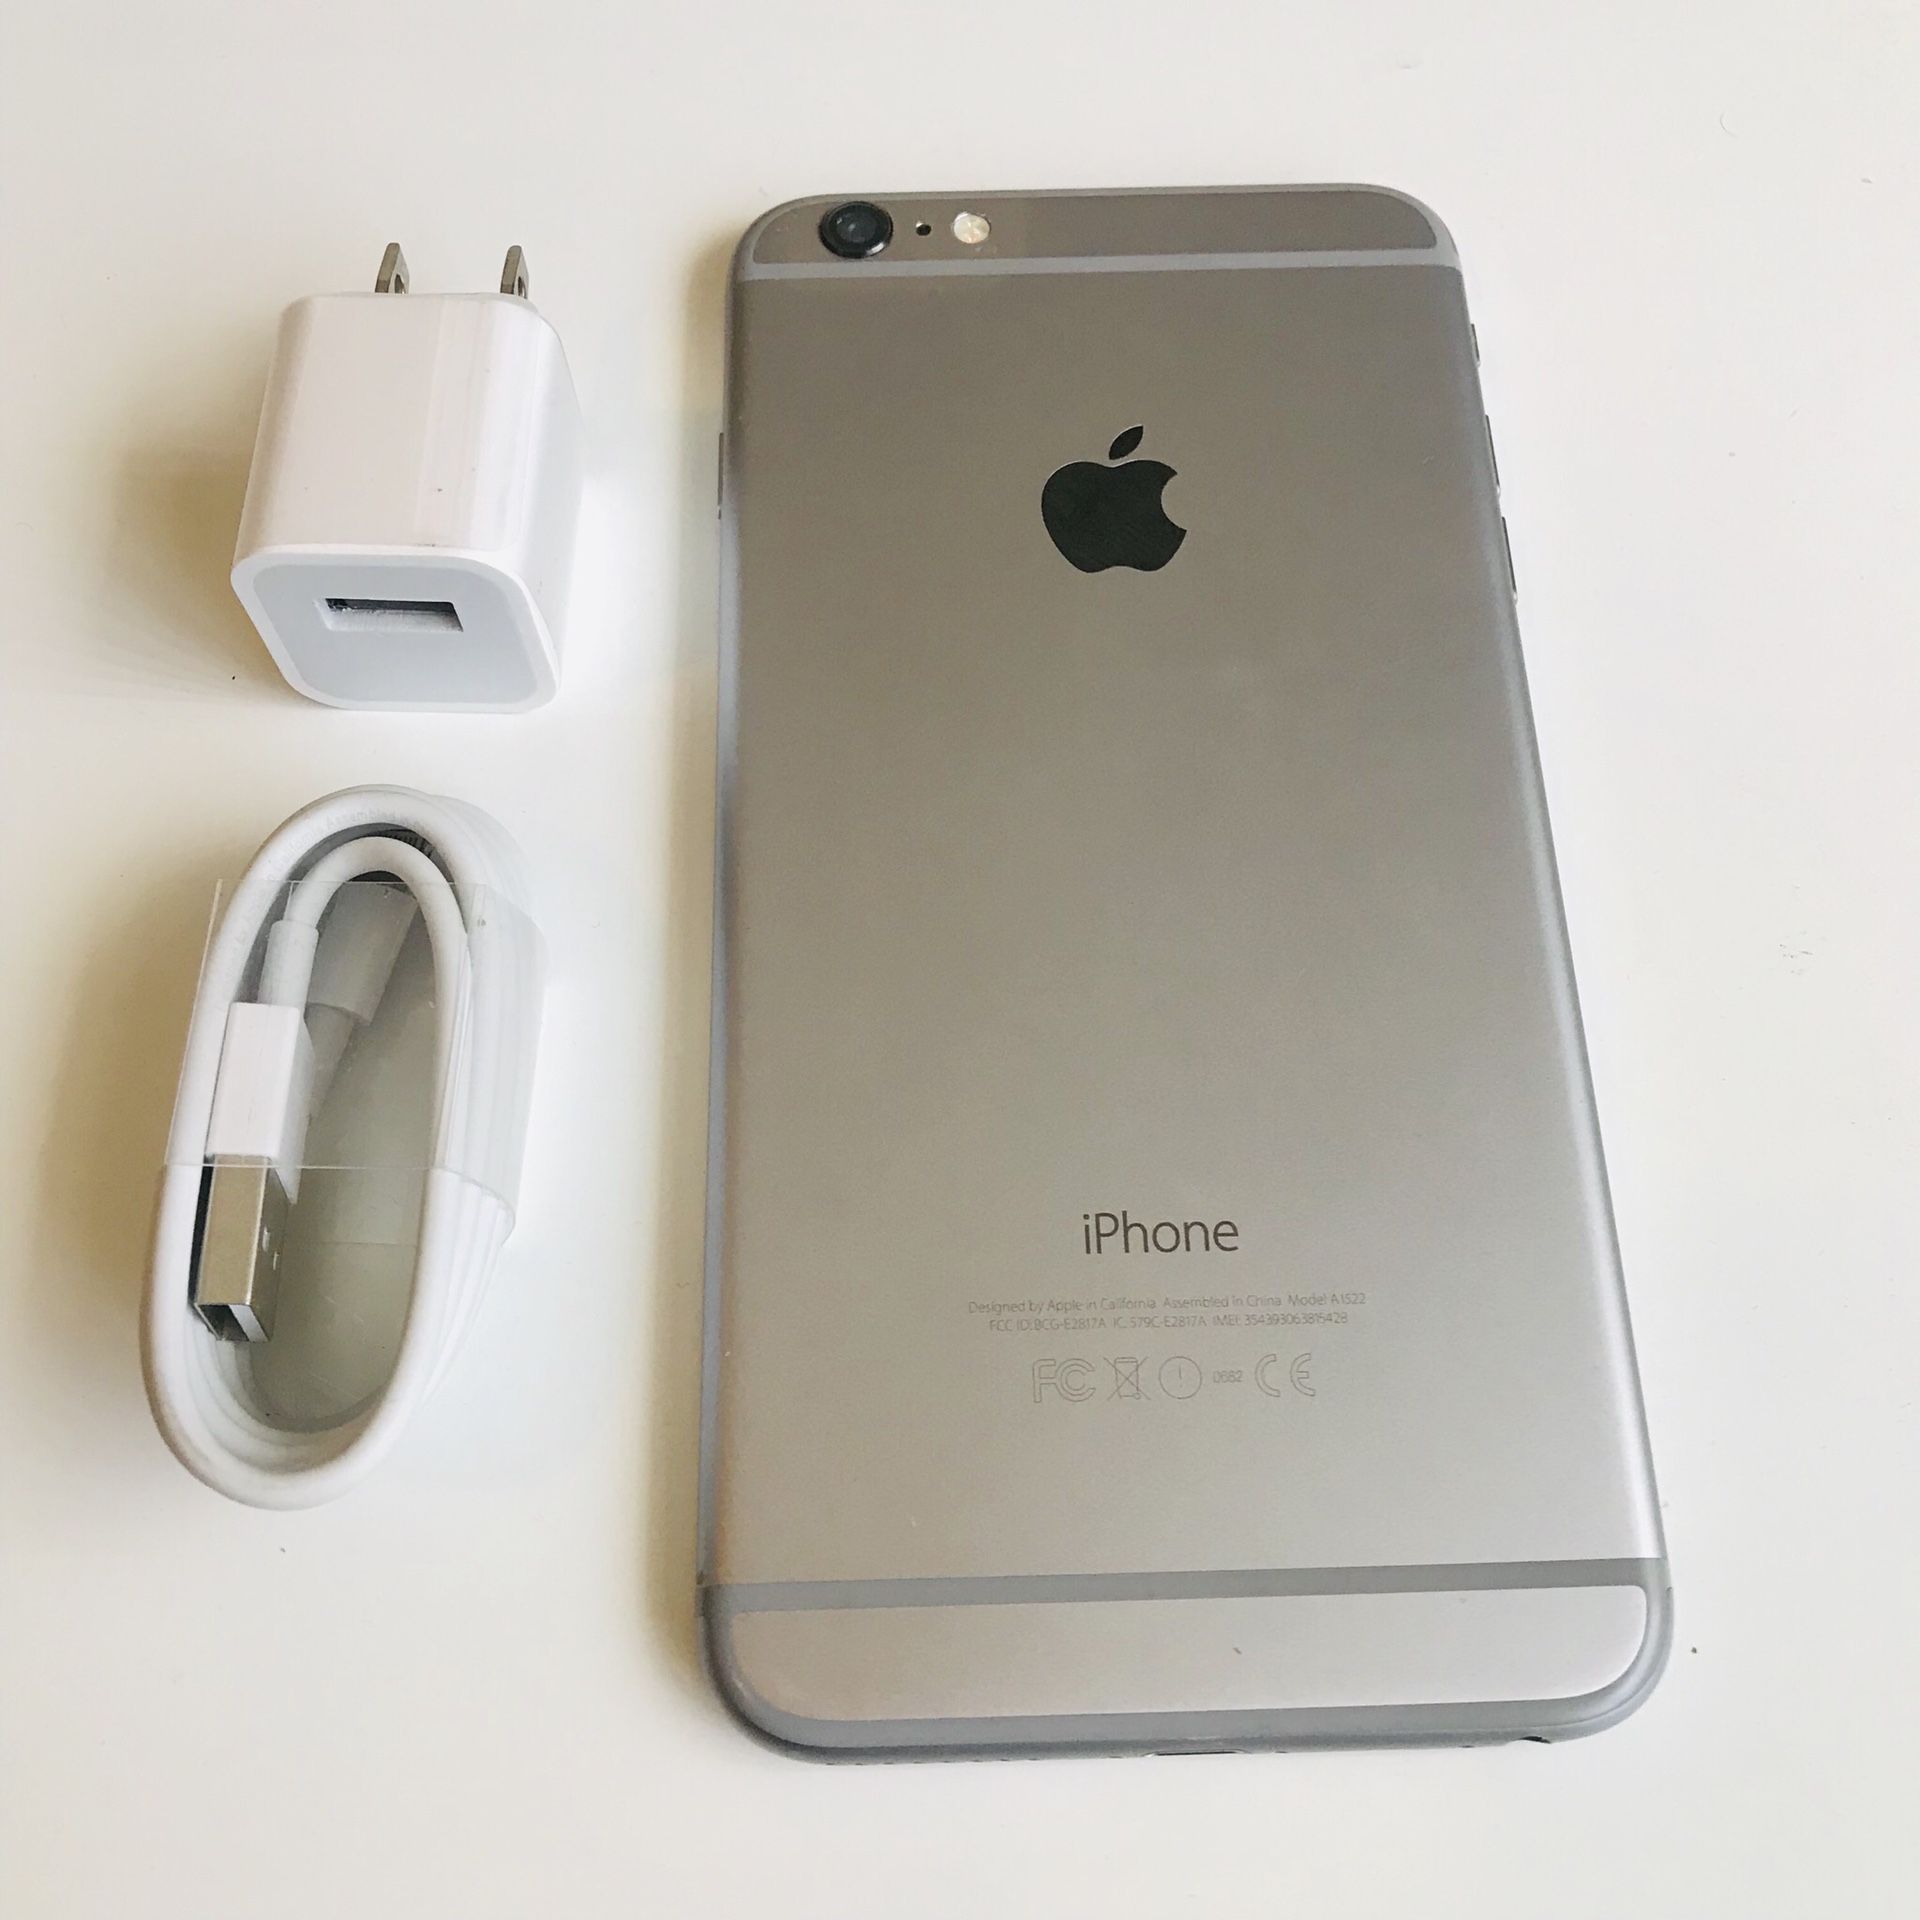 iPhone 6 Plus 16gb Factory Unlocked (Any Carrier) Works perfect